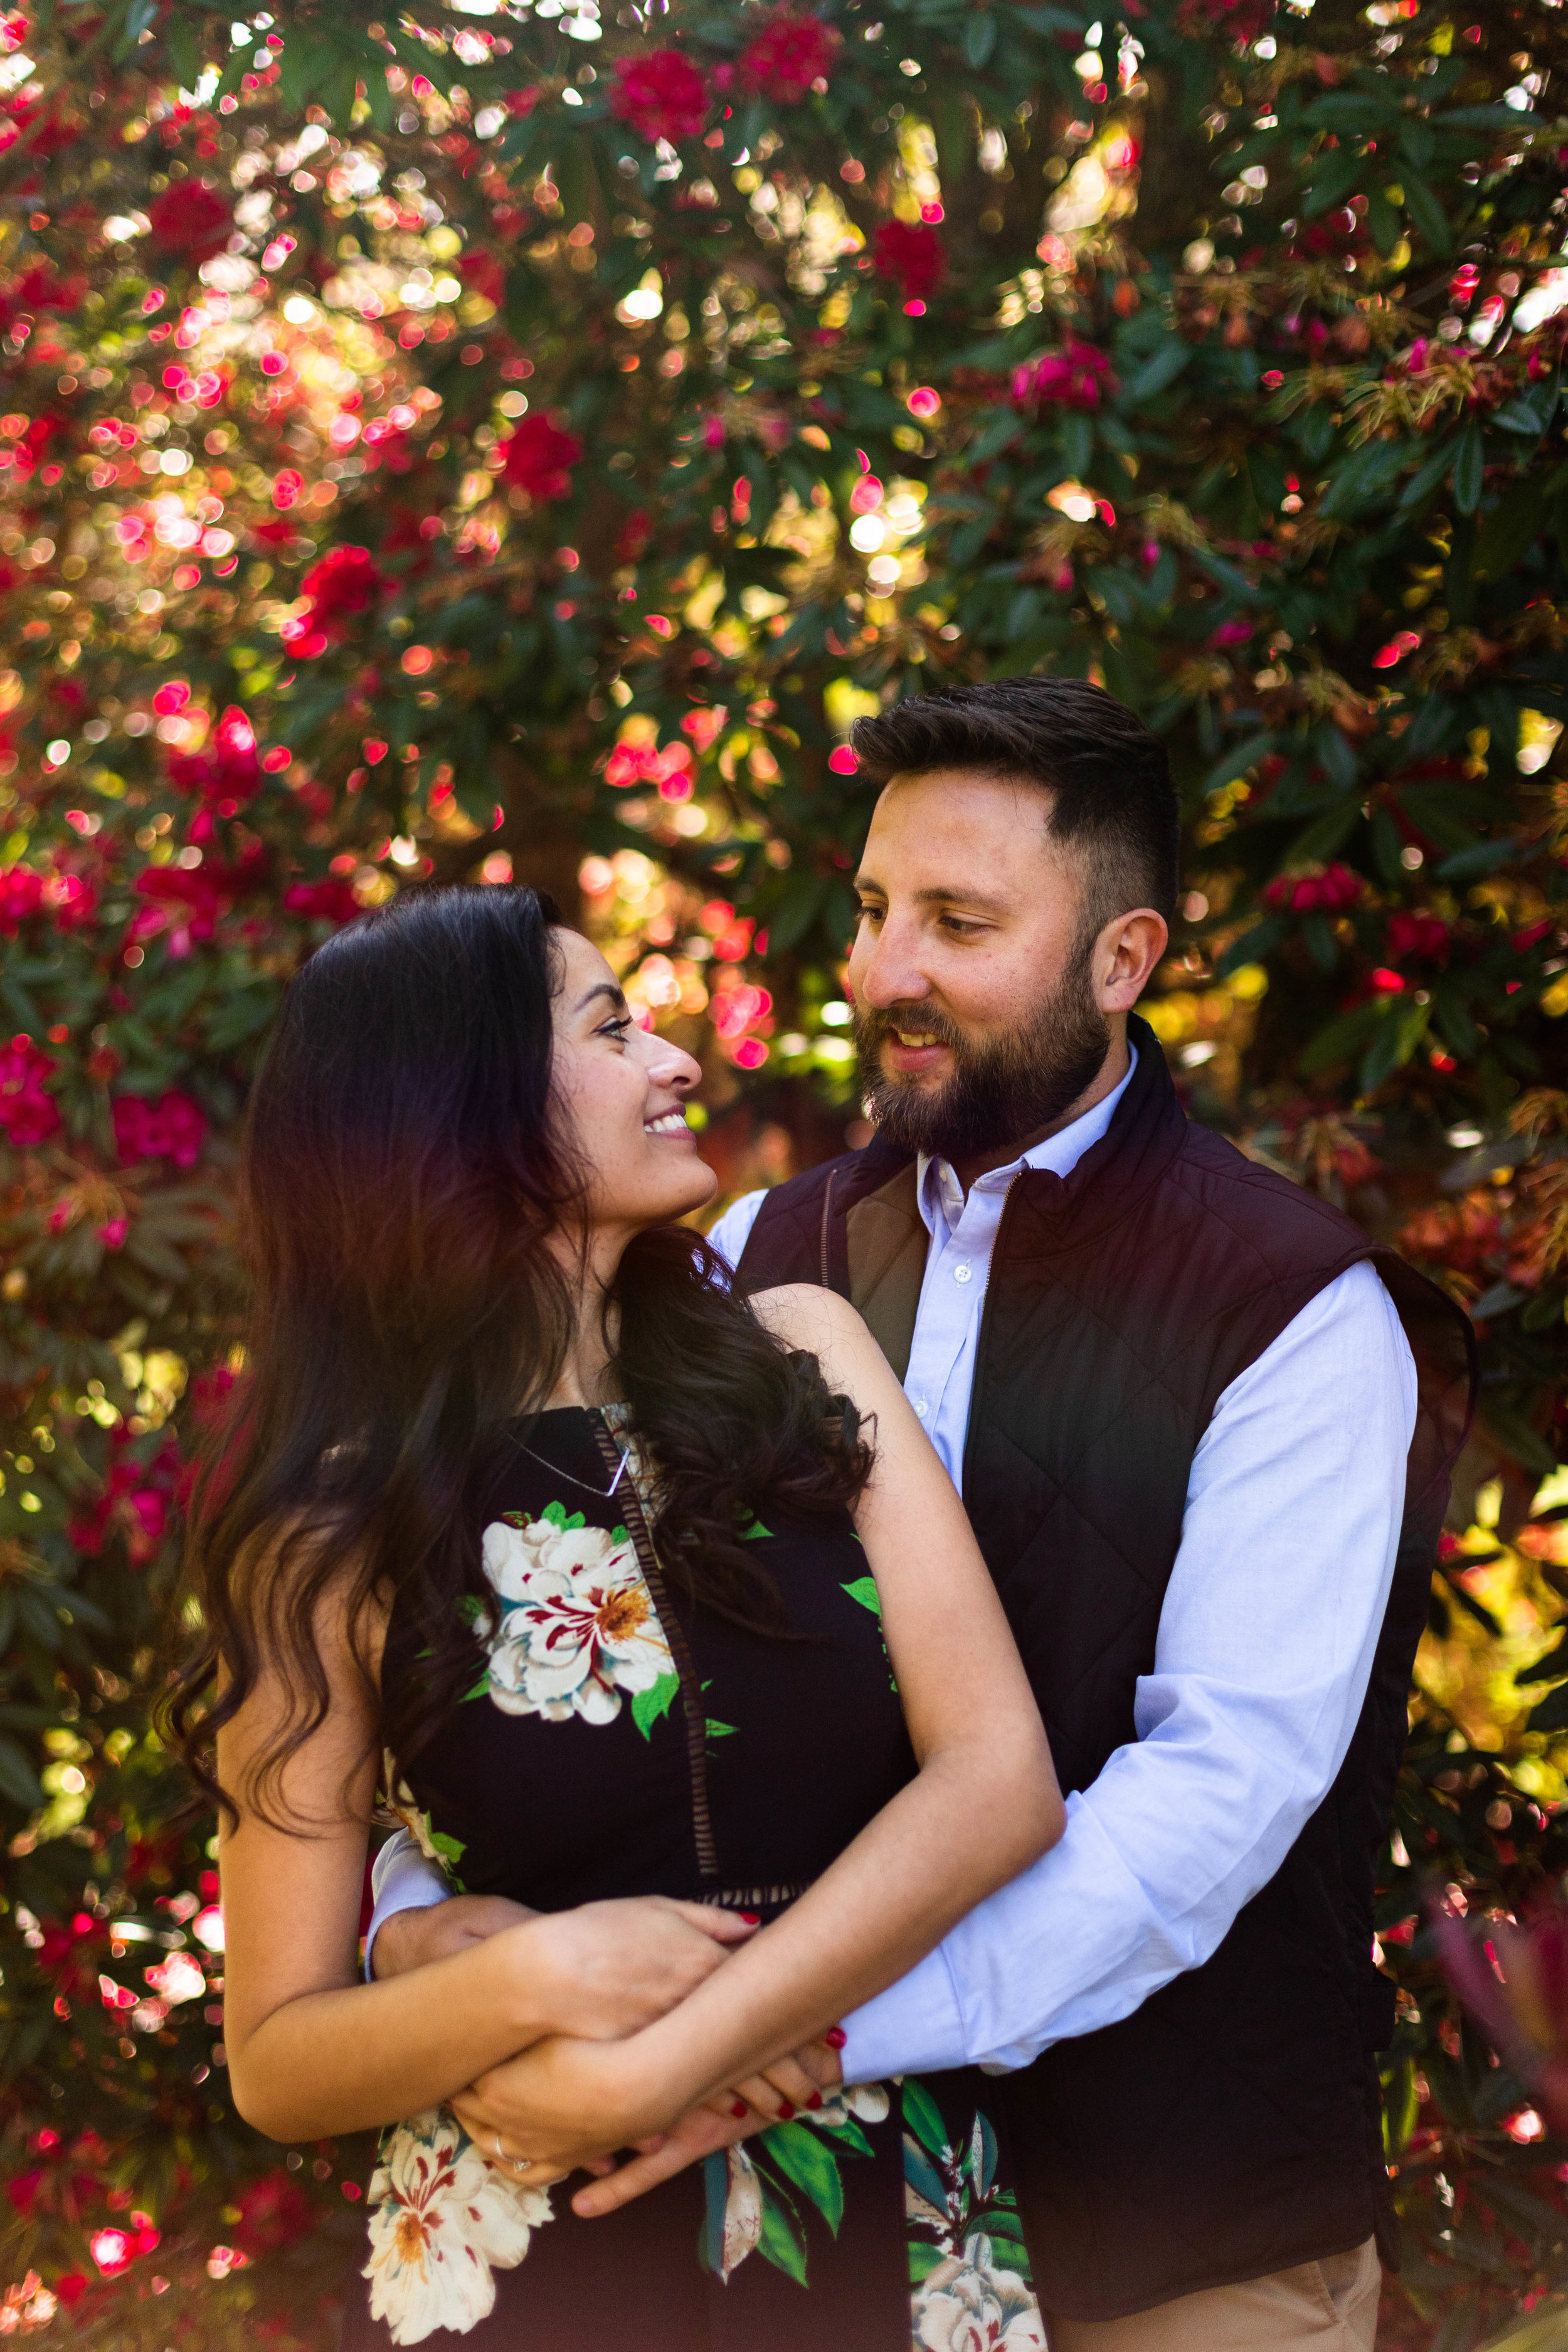  Couple in front of tree with red flowers. Woman with long black wavy hair wearing black dress with large white flowers. Man wearing light blue button down with a black vest. 